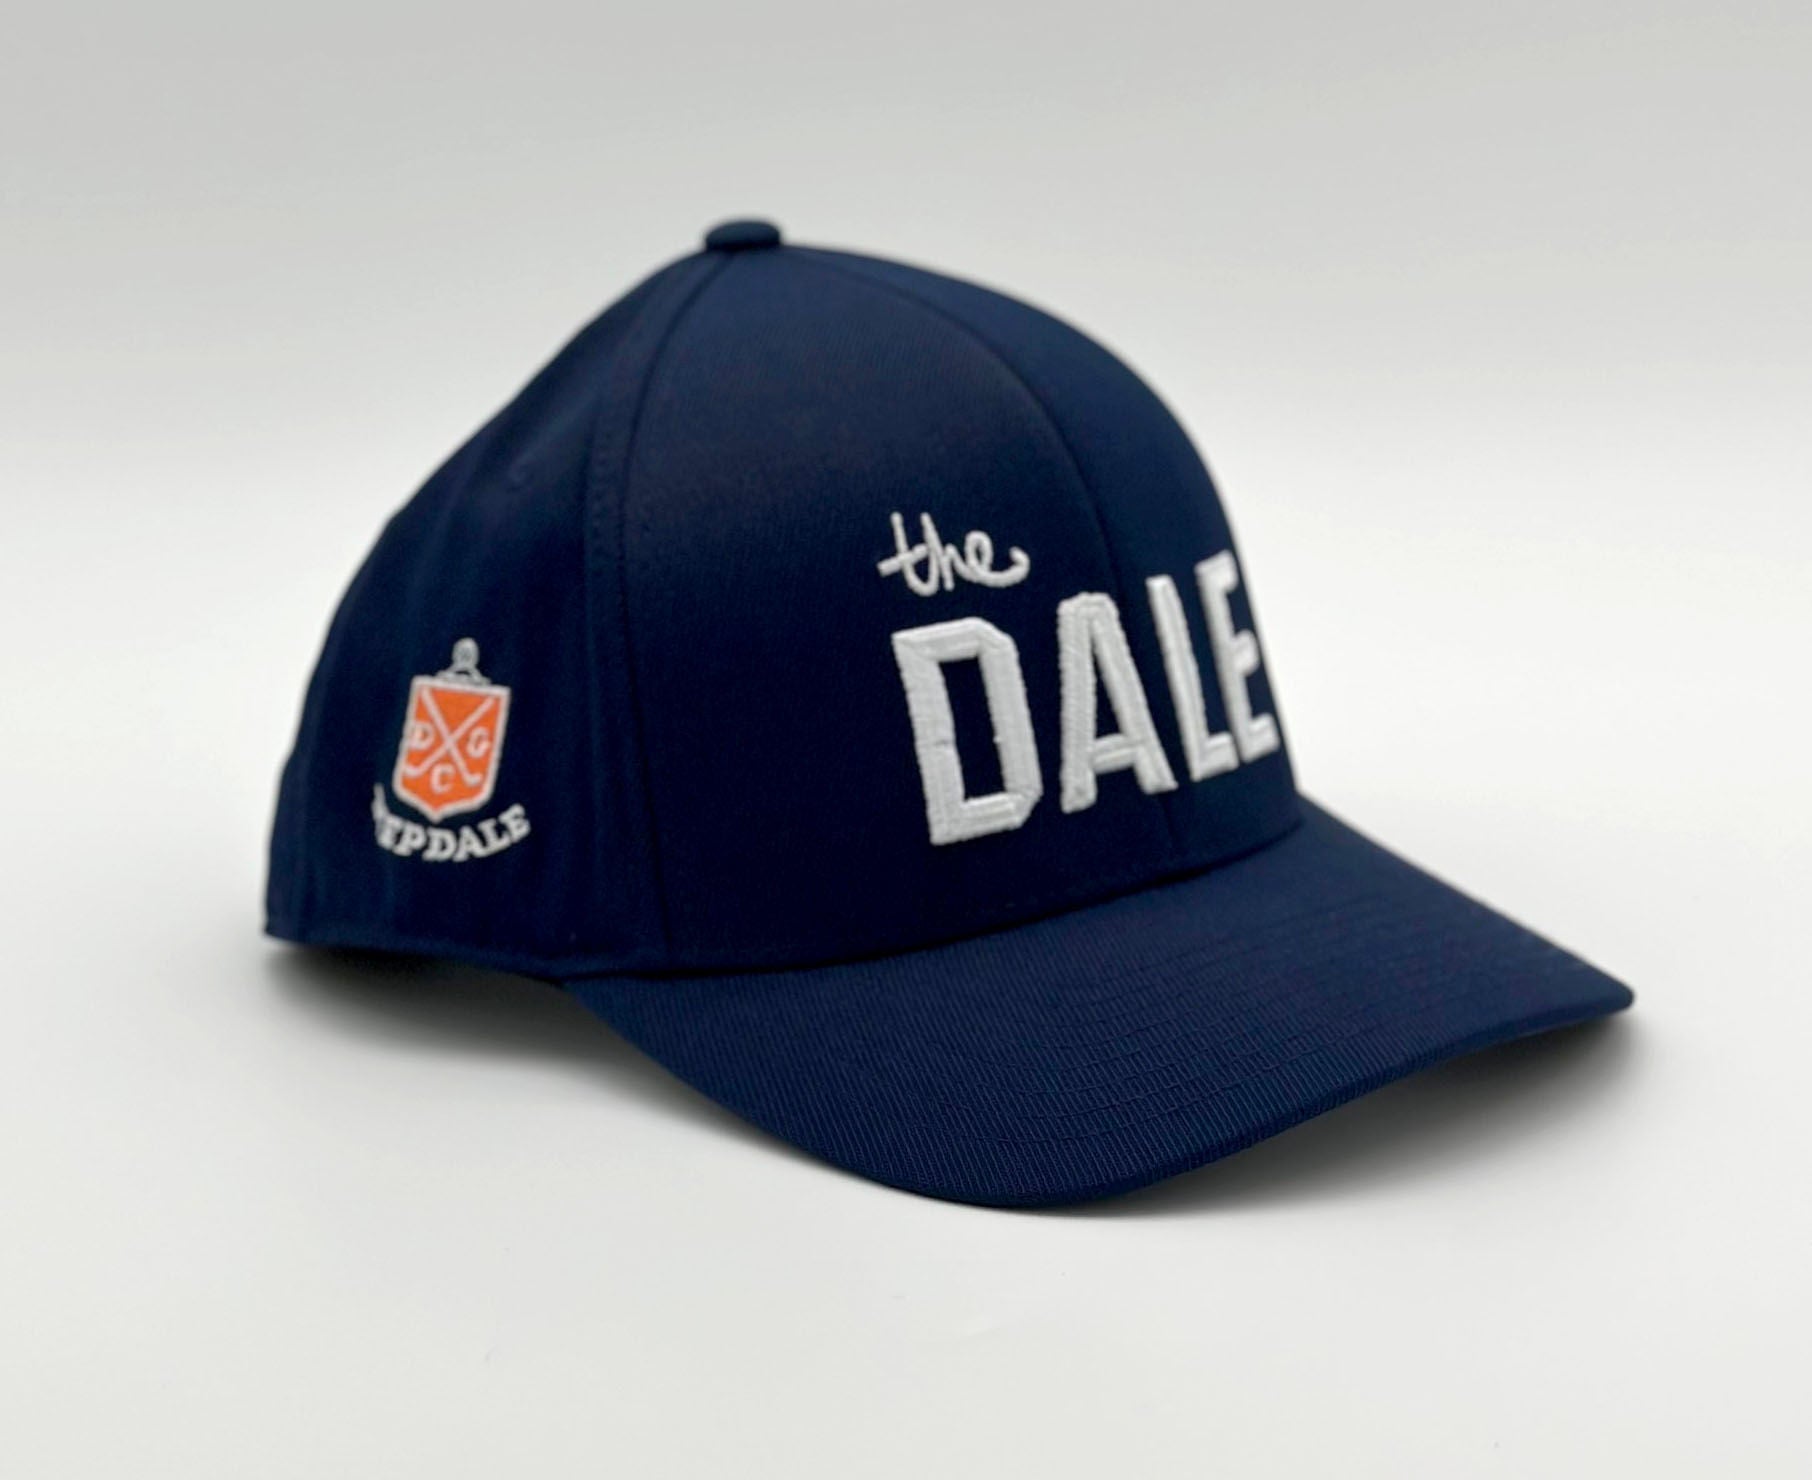 The Dale G4 Hat